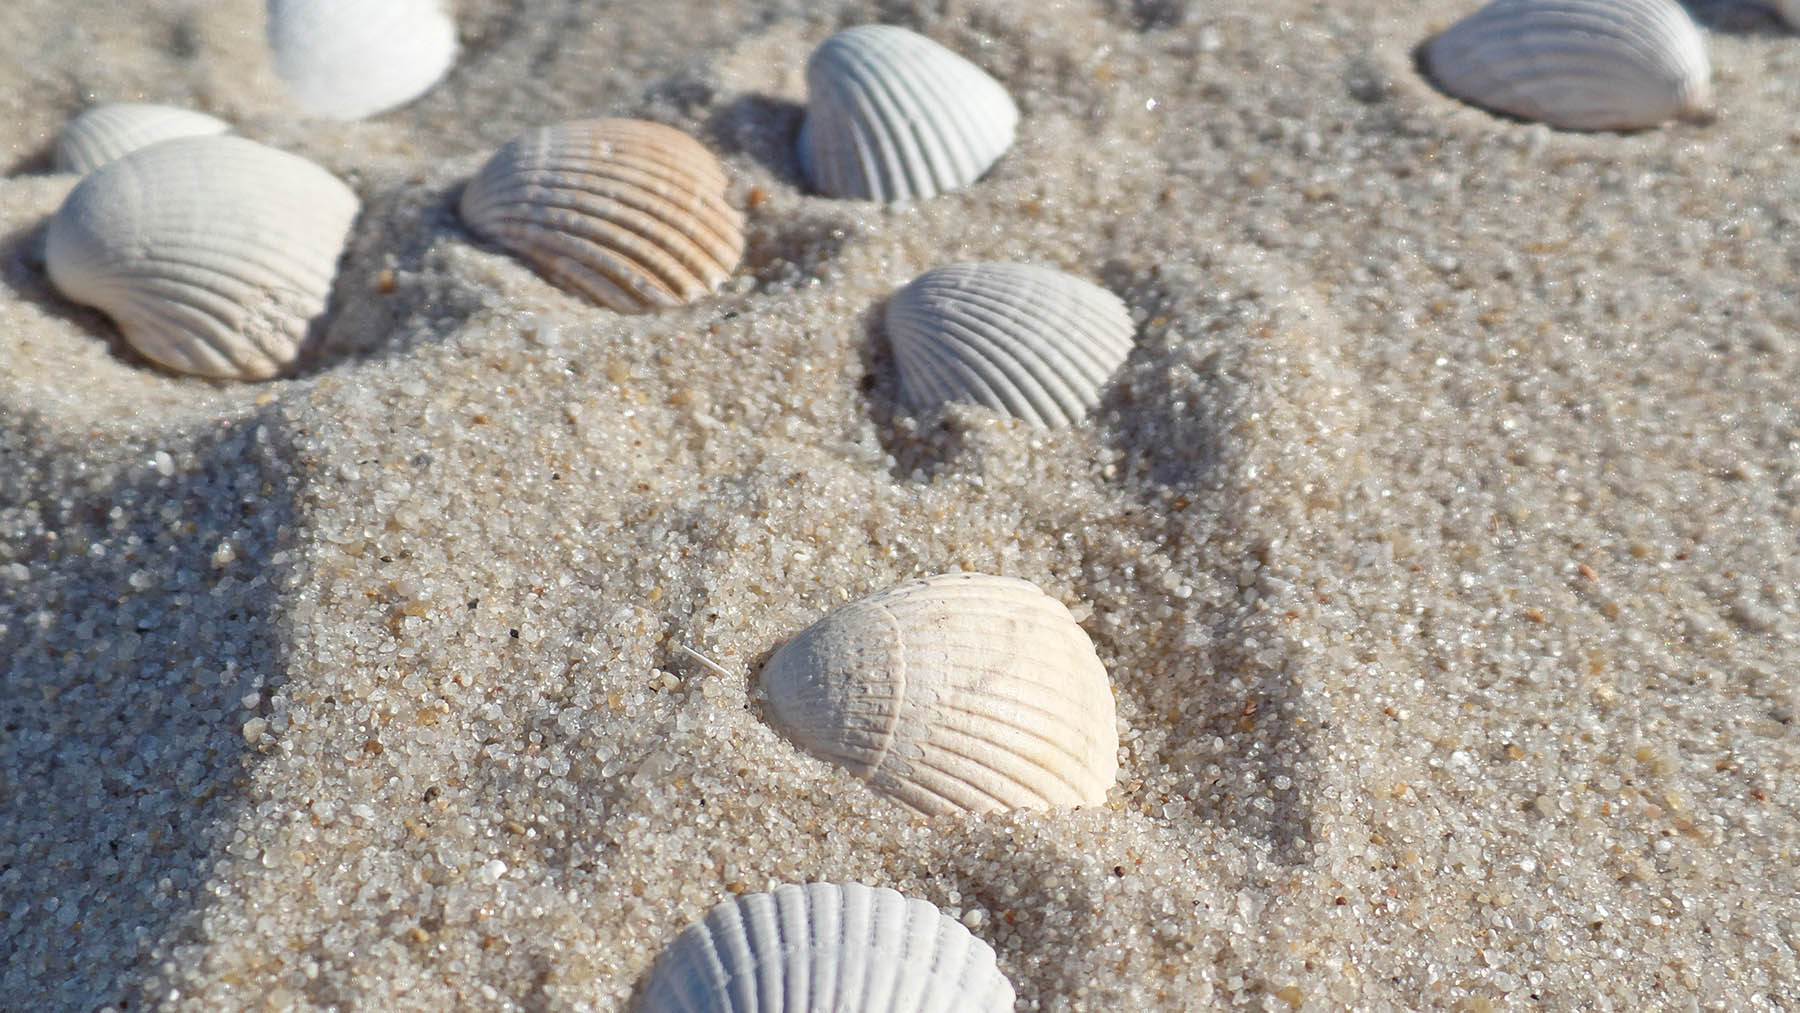 Photo of sea shells in the sand (Creative Commons Image, courtesy of RawPixel.com)